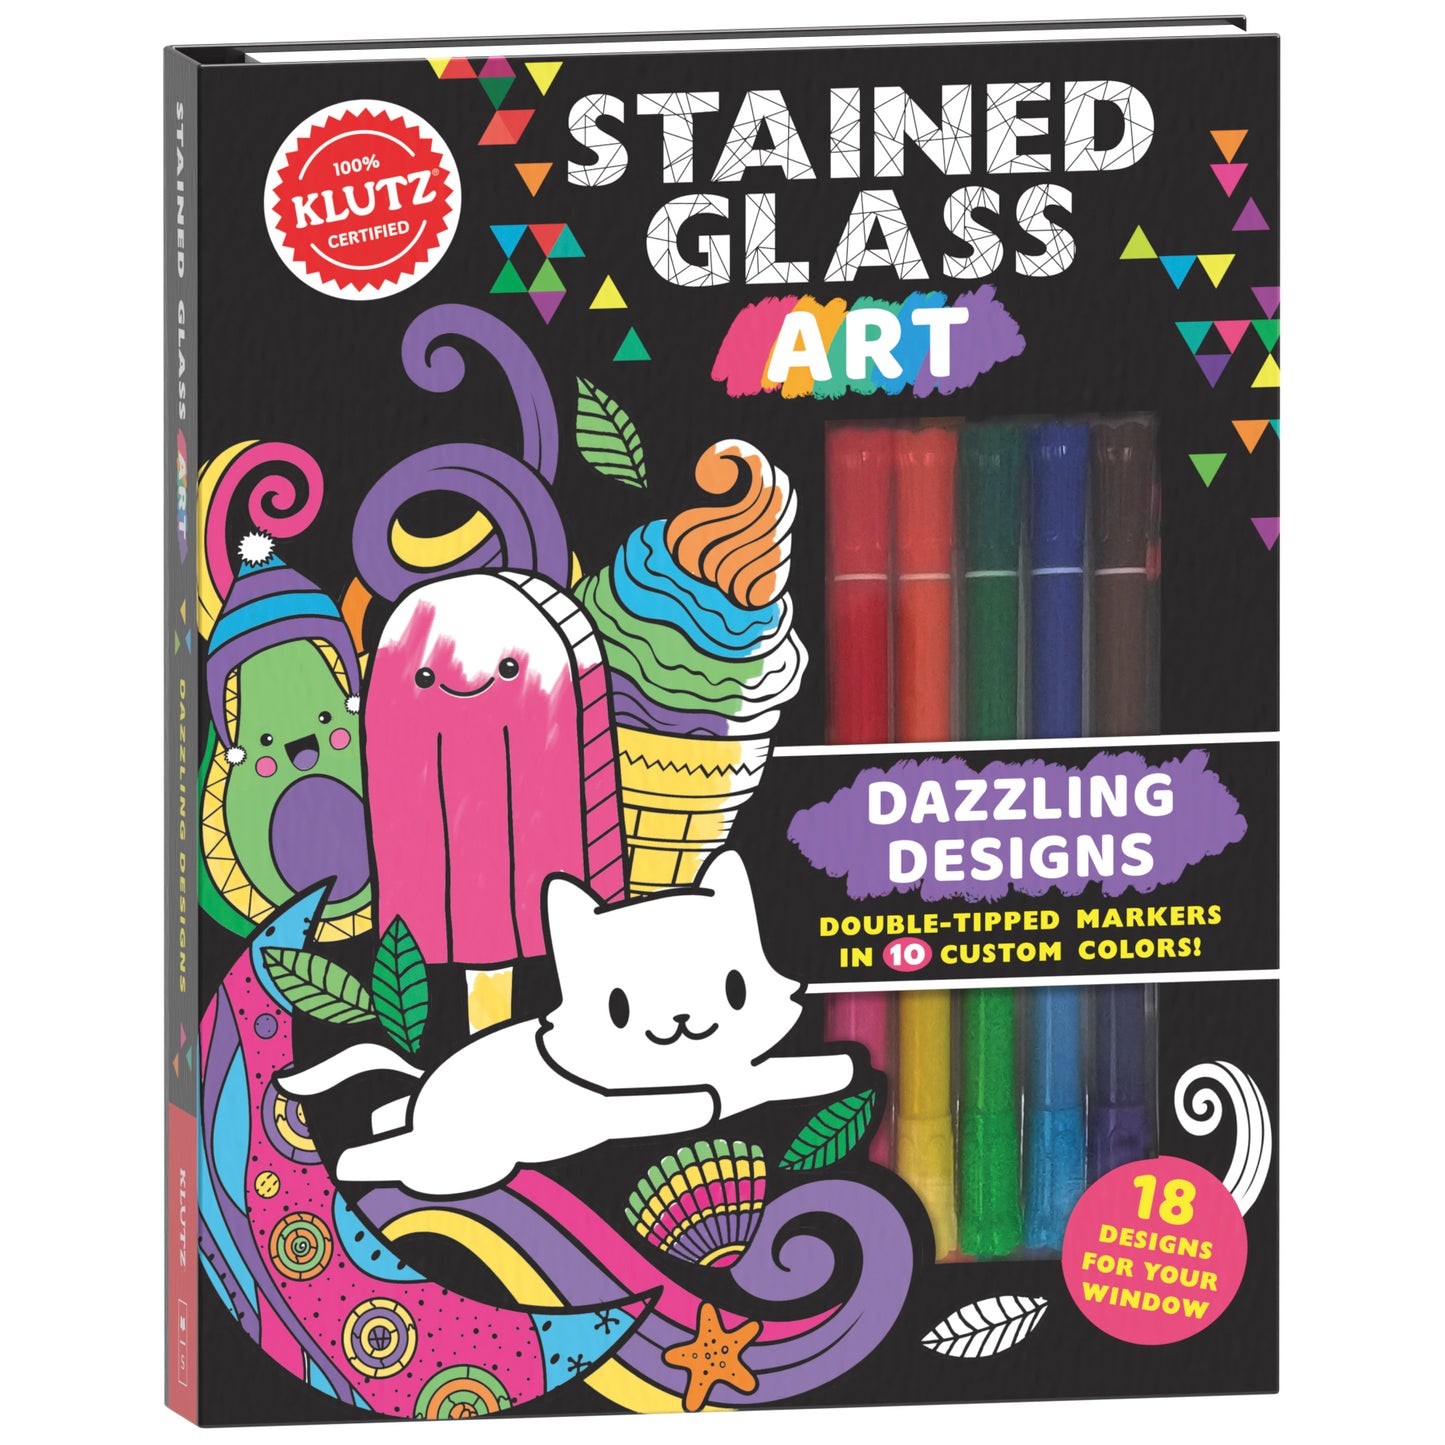 Stained Glass Art Dazzling Designs Set